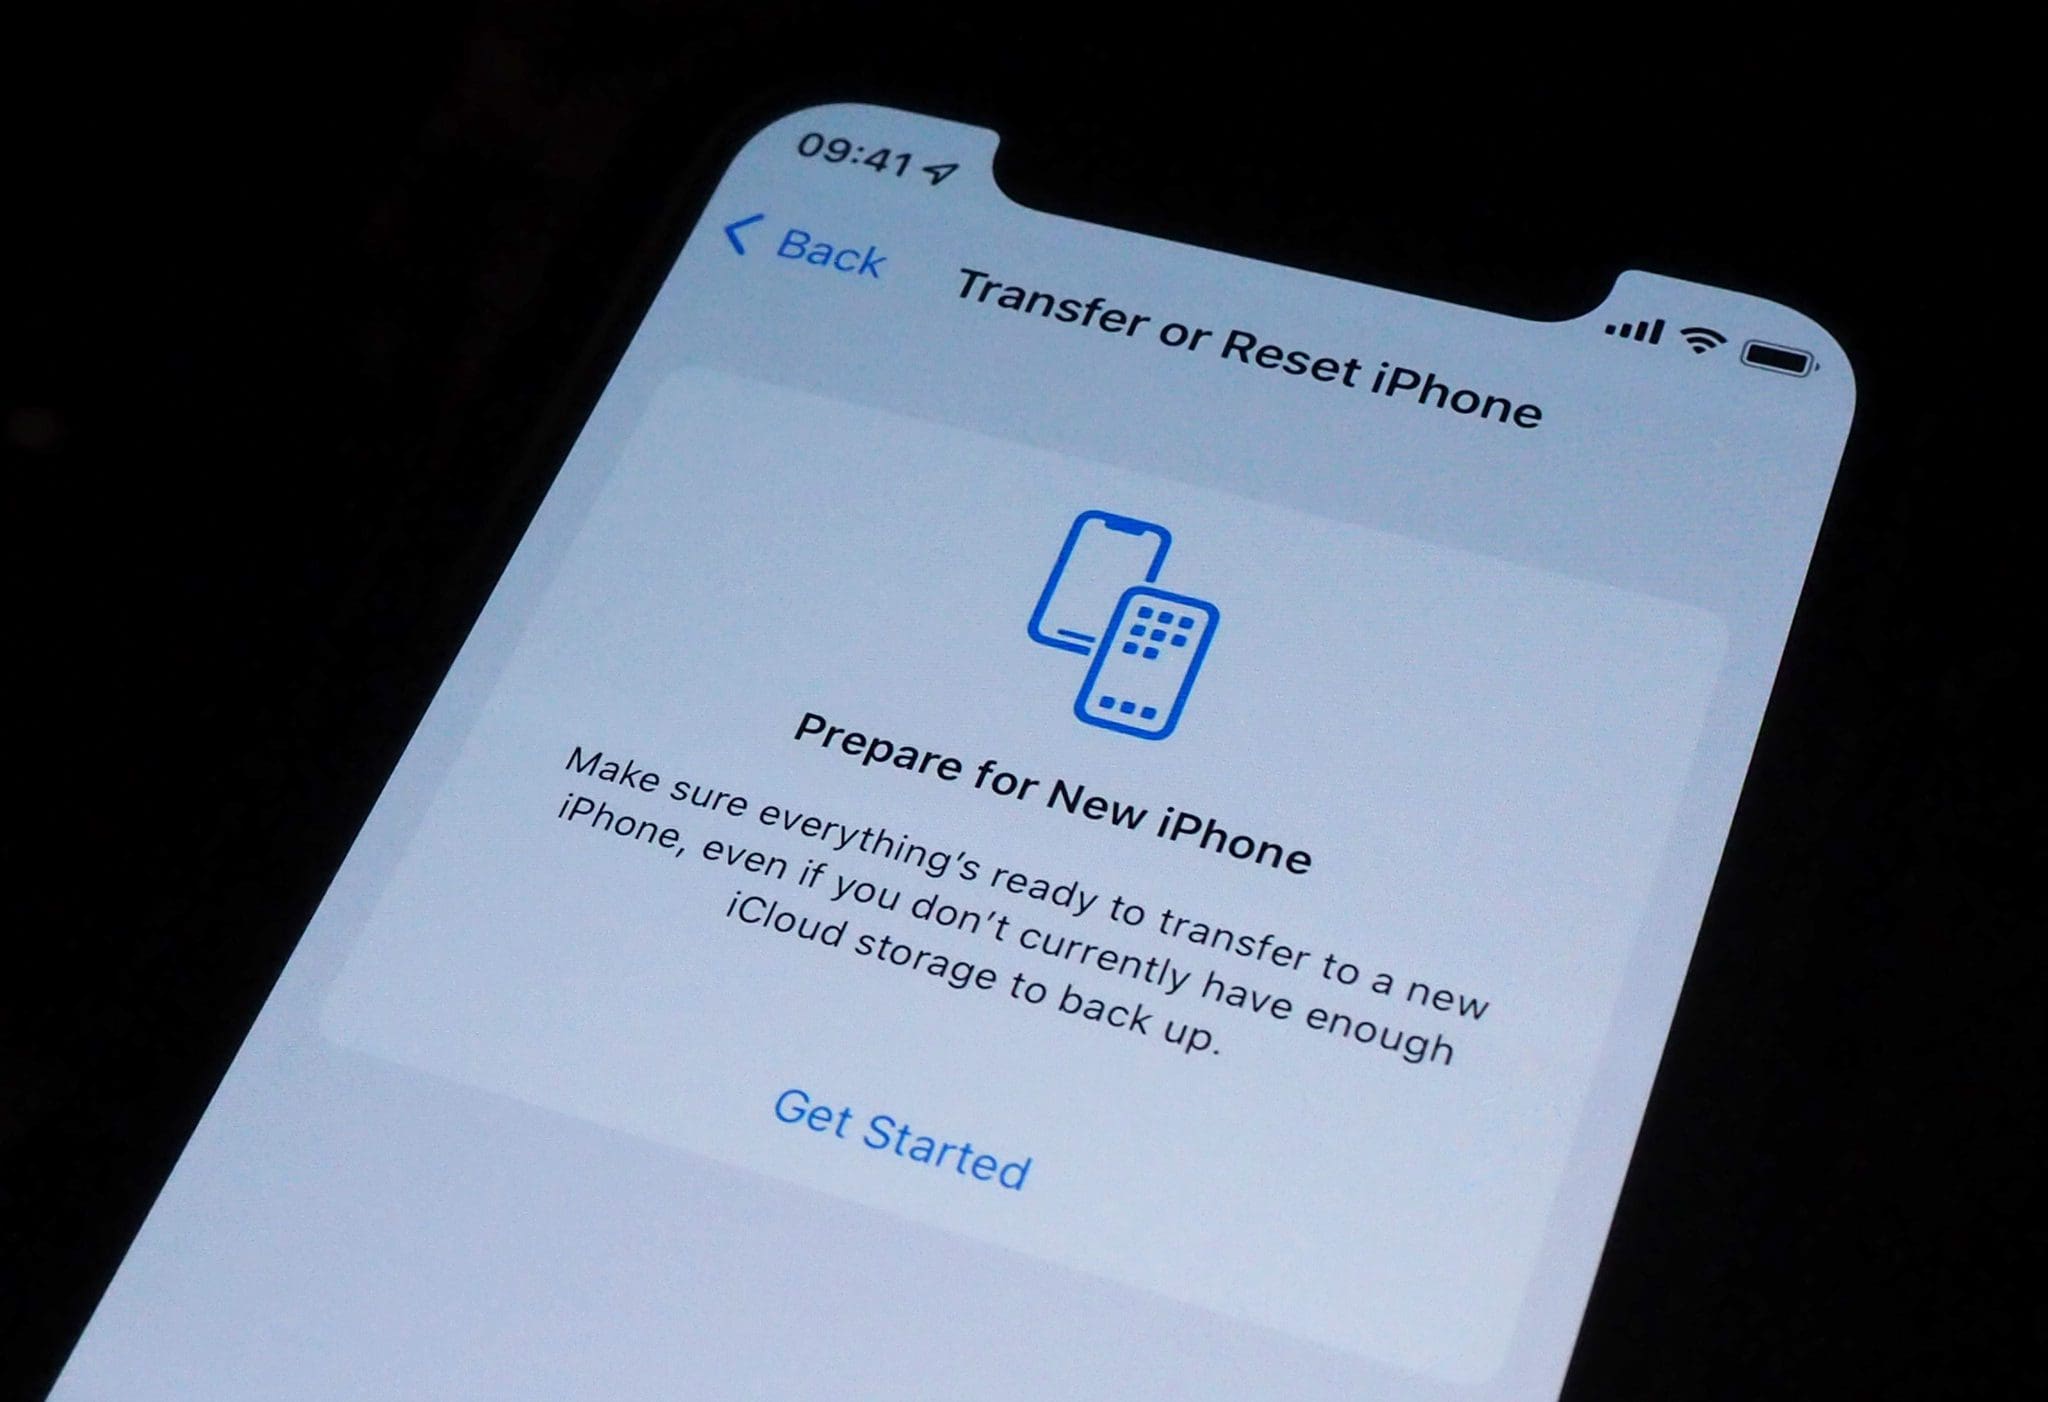 Memory Full Get Free Temporary Icloud Storage To Backup Your Data To A New Iphone Appletoolbox